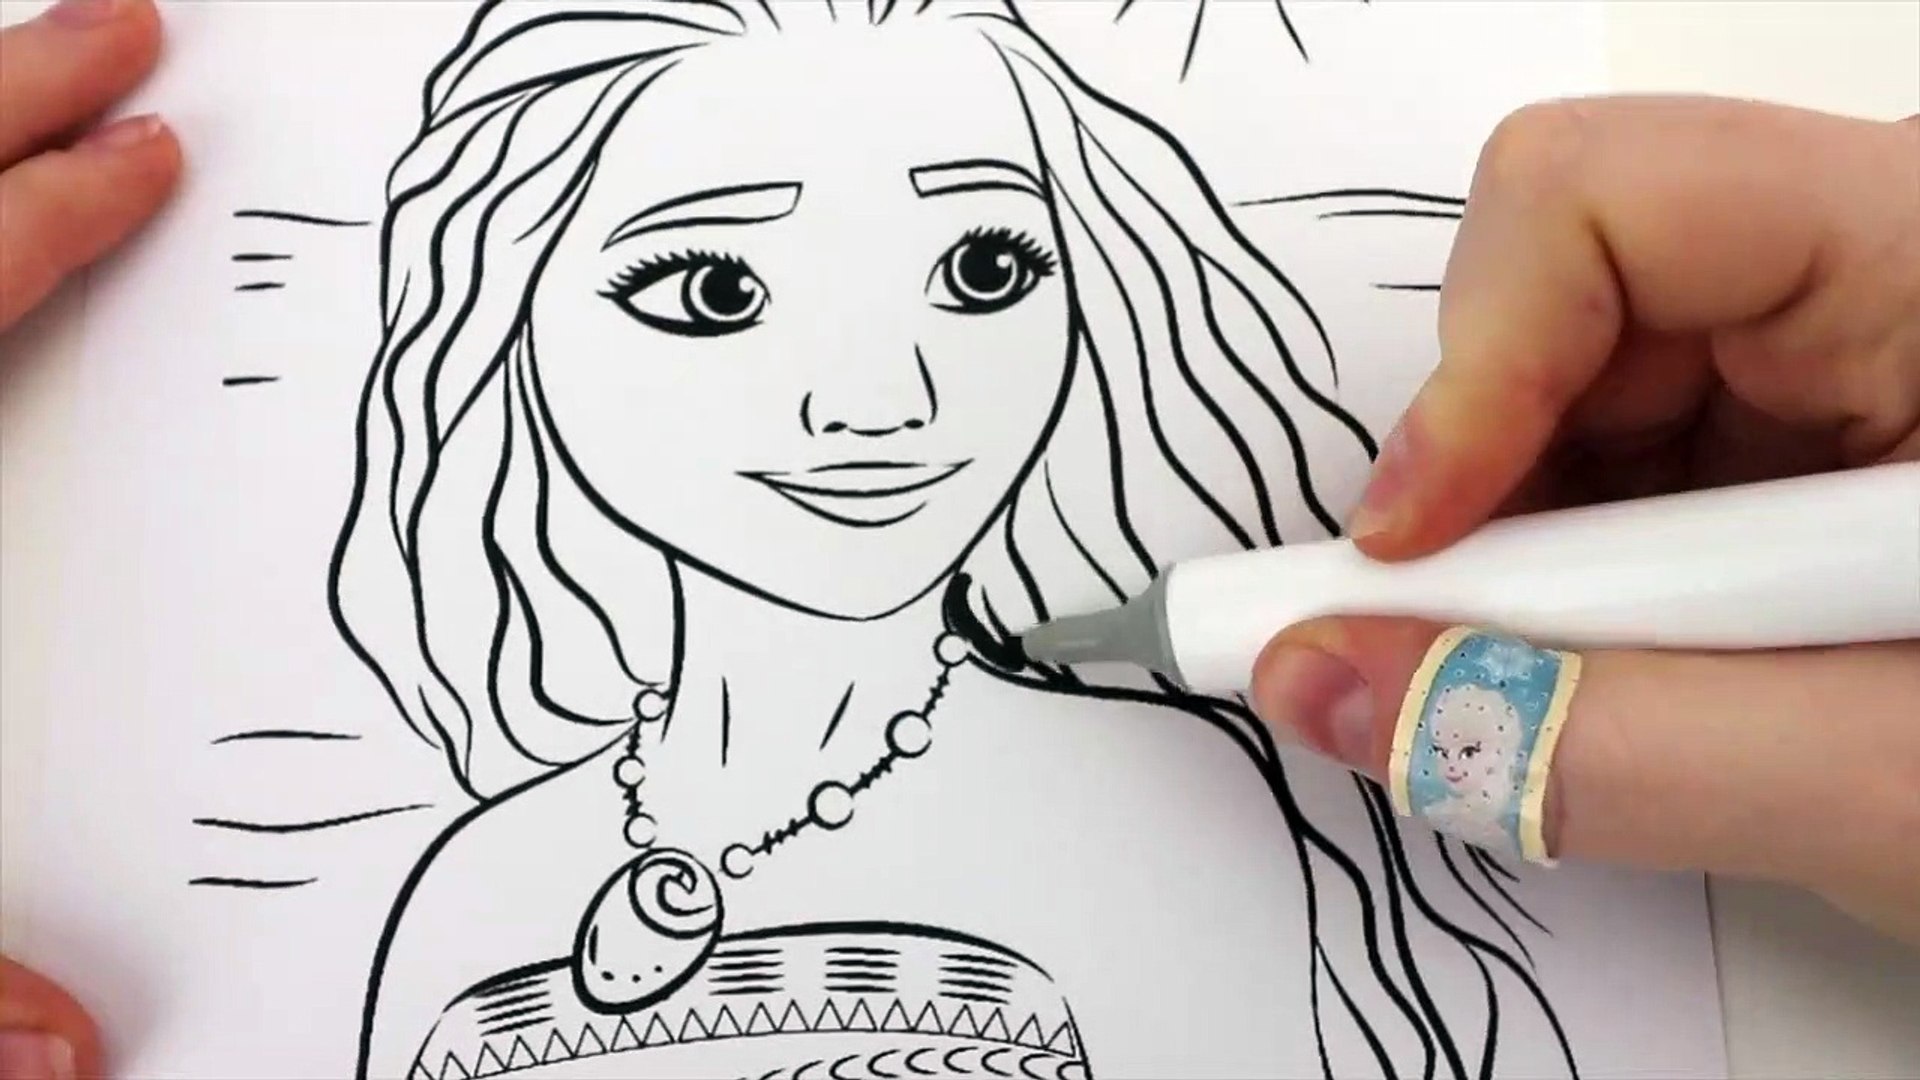 Disney Princess Moana Coloring Book Videos For Kids With Heihei And Pua Coloring Pages Py 0l Video Dailymotion